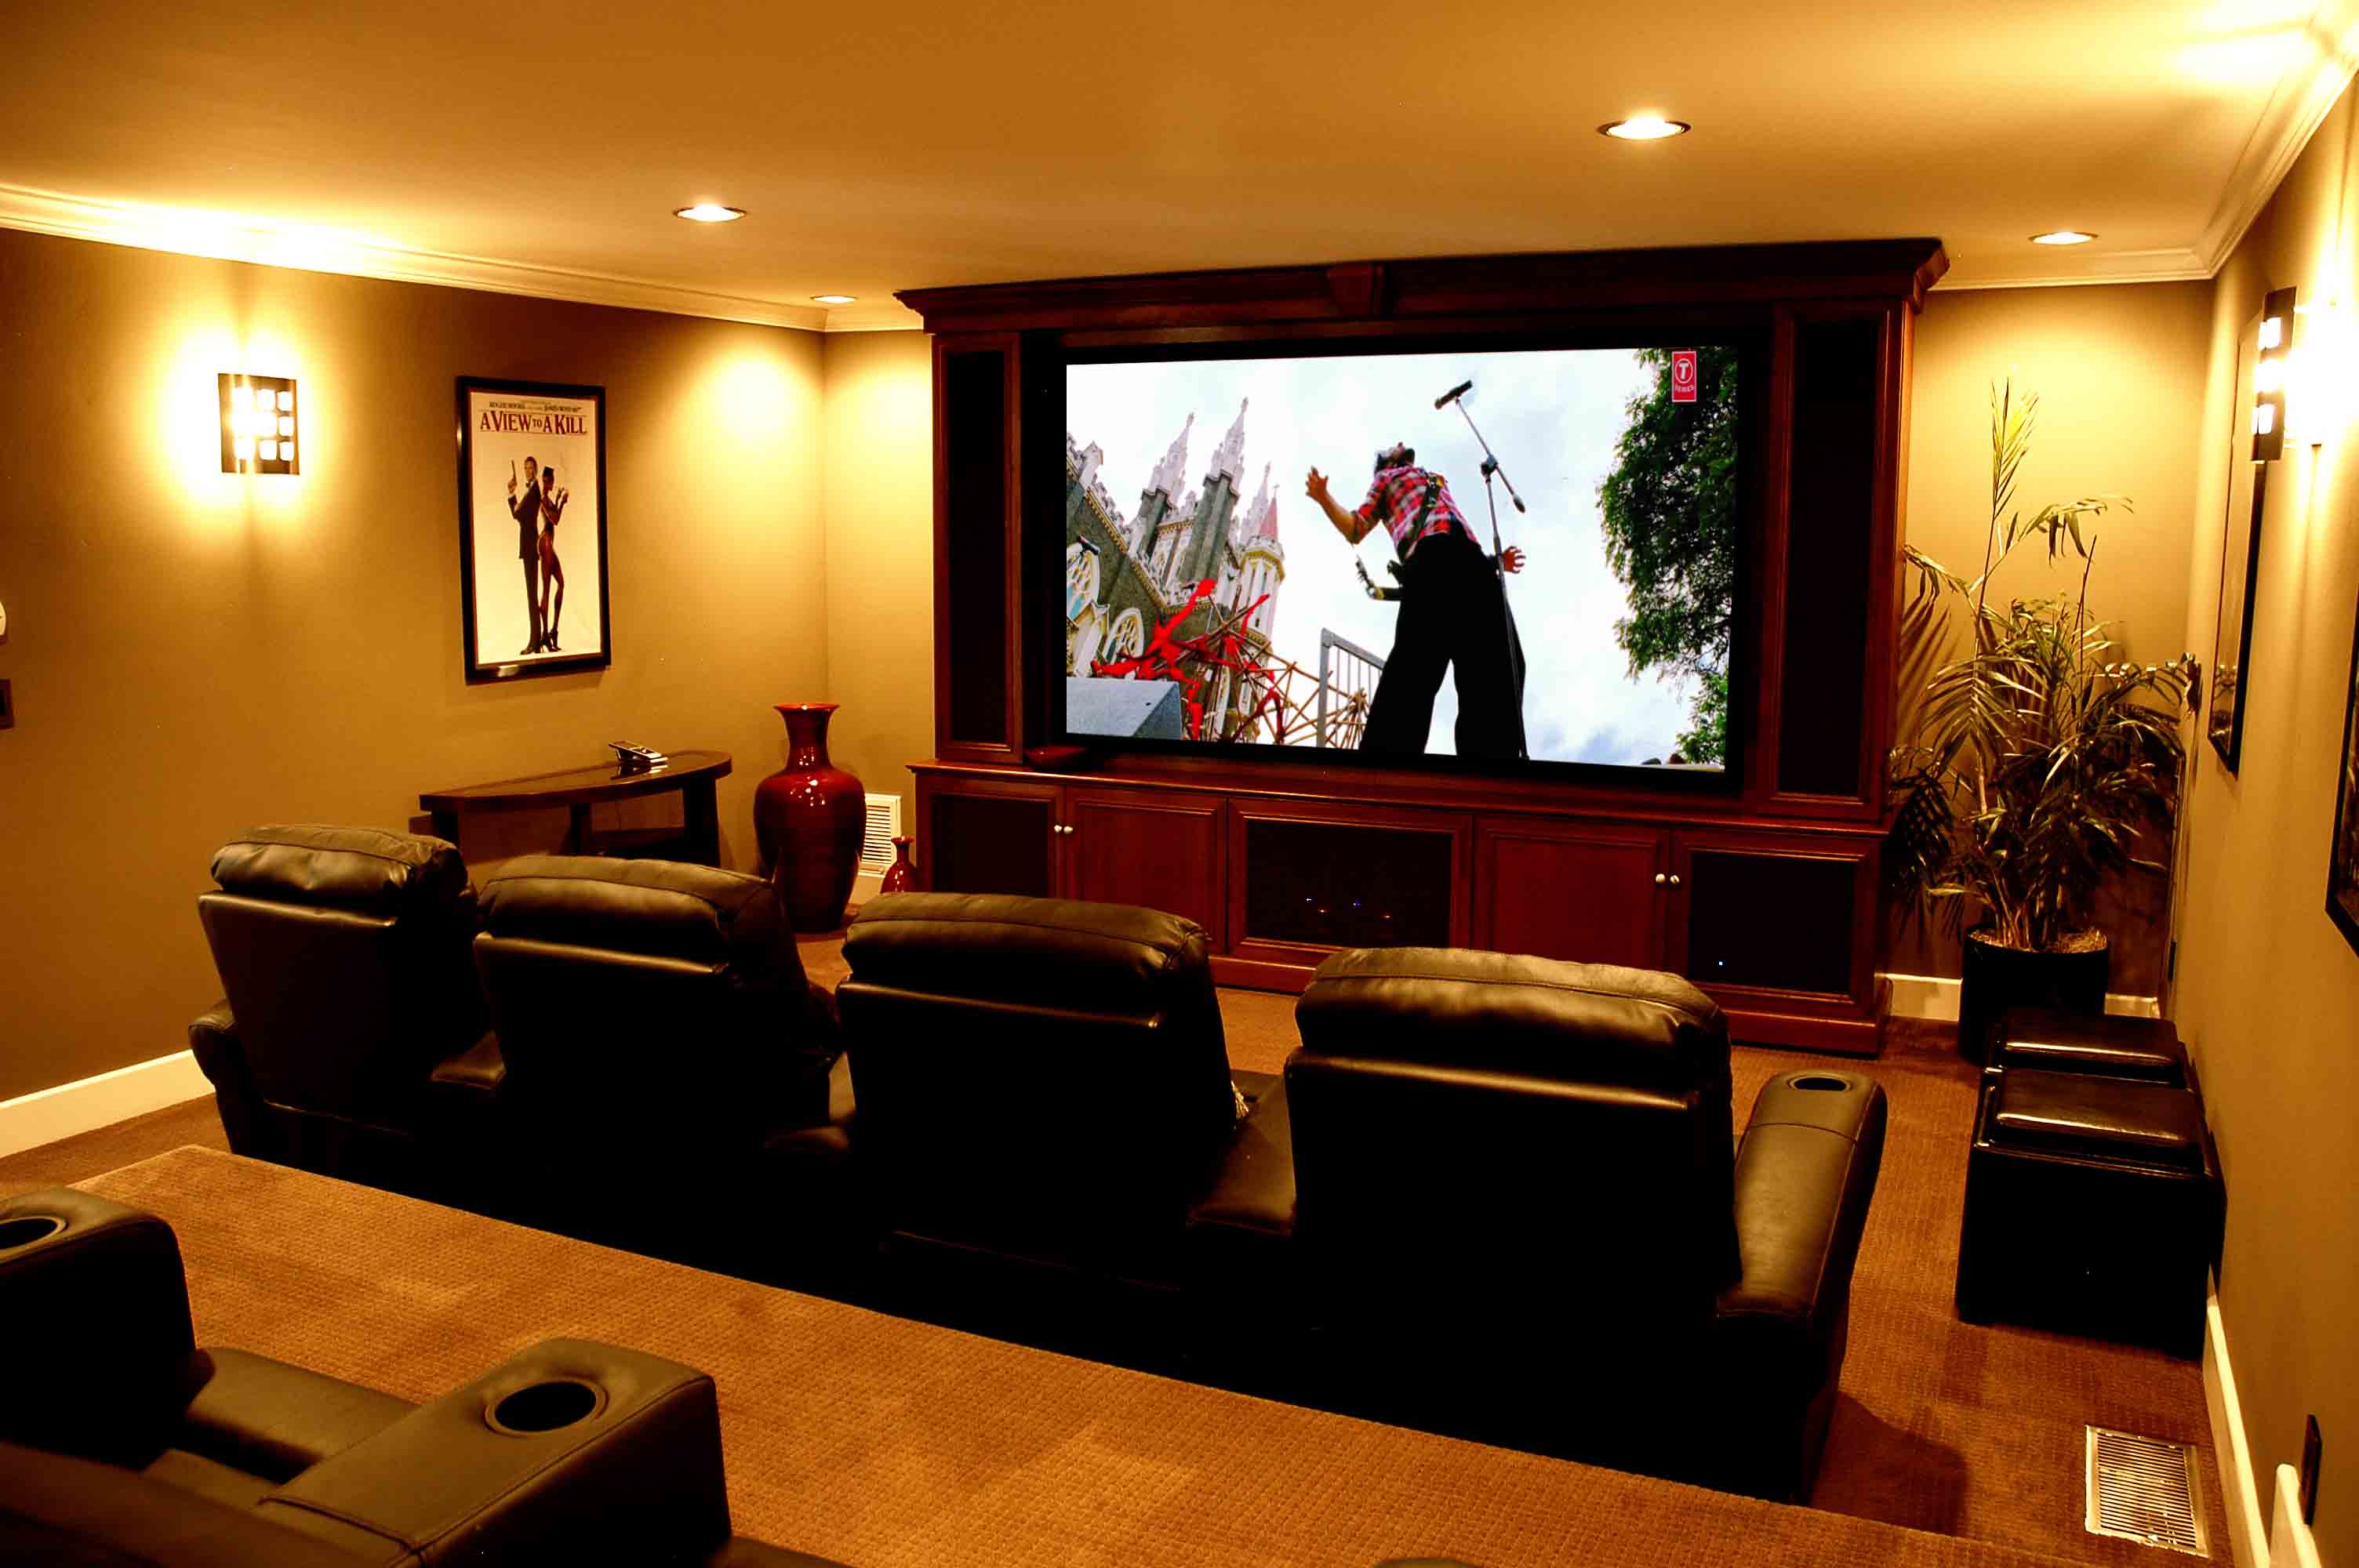 15 Simple, Elegant and Affordable Home Cinema Room Ideas | Architecture ...